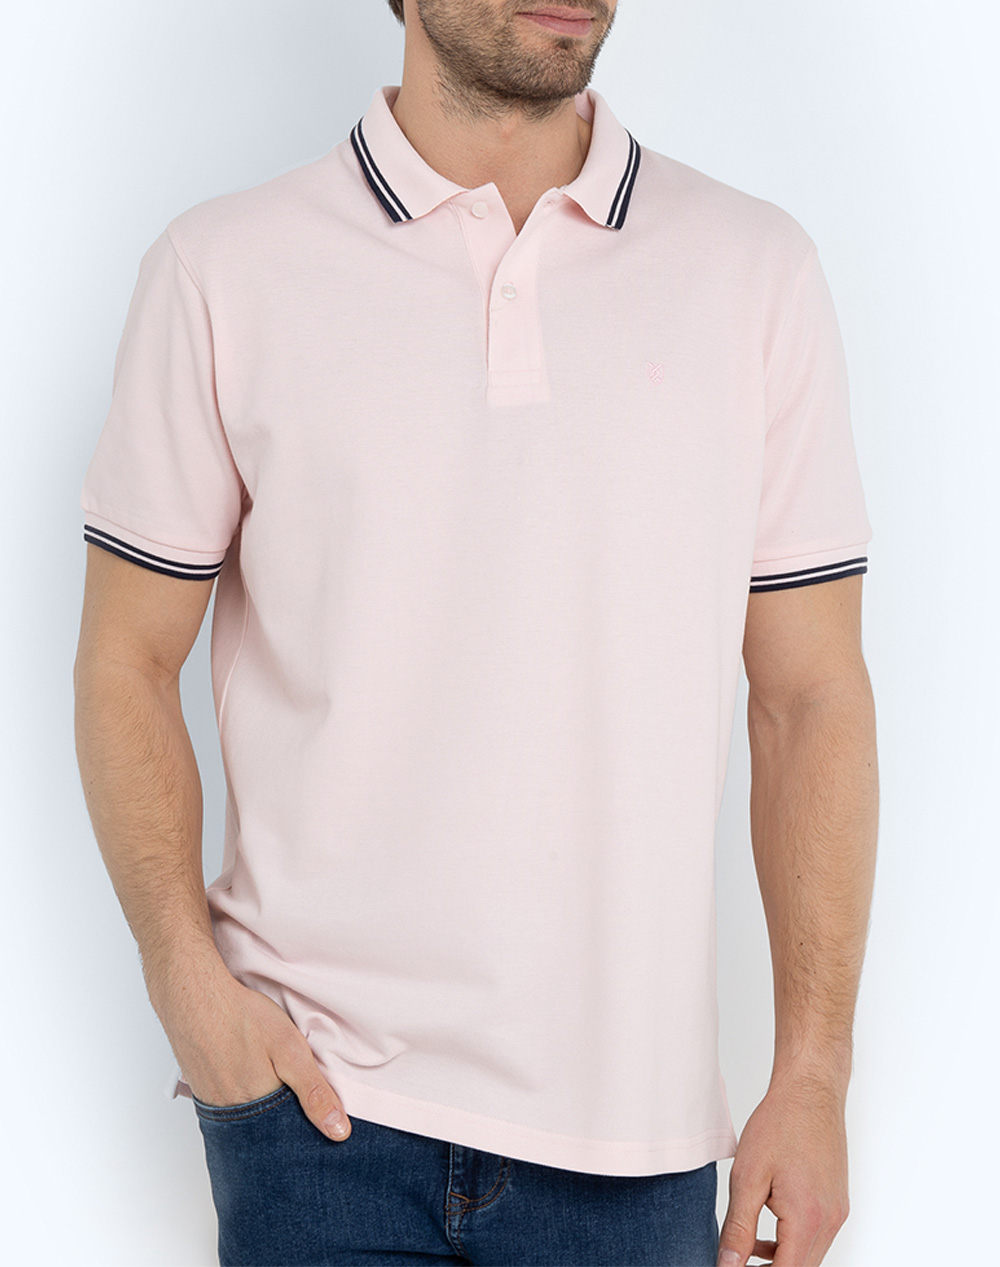 THE BOSTONIANS ΜΠΛΟΥΖΑ POLO PIQUE TWIN TIPPED REGULAR 3PS1271-PINK Pink